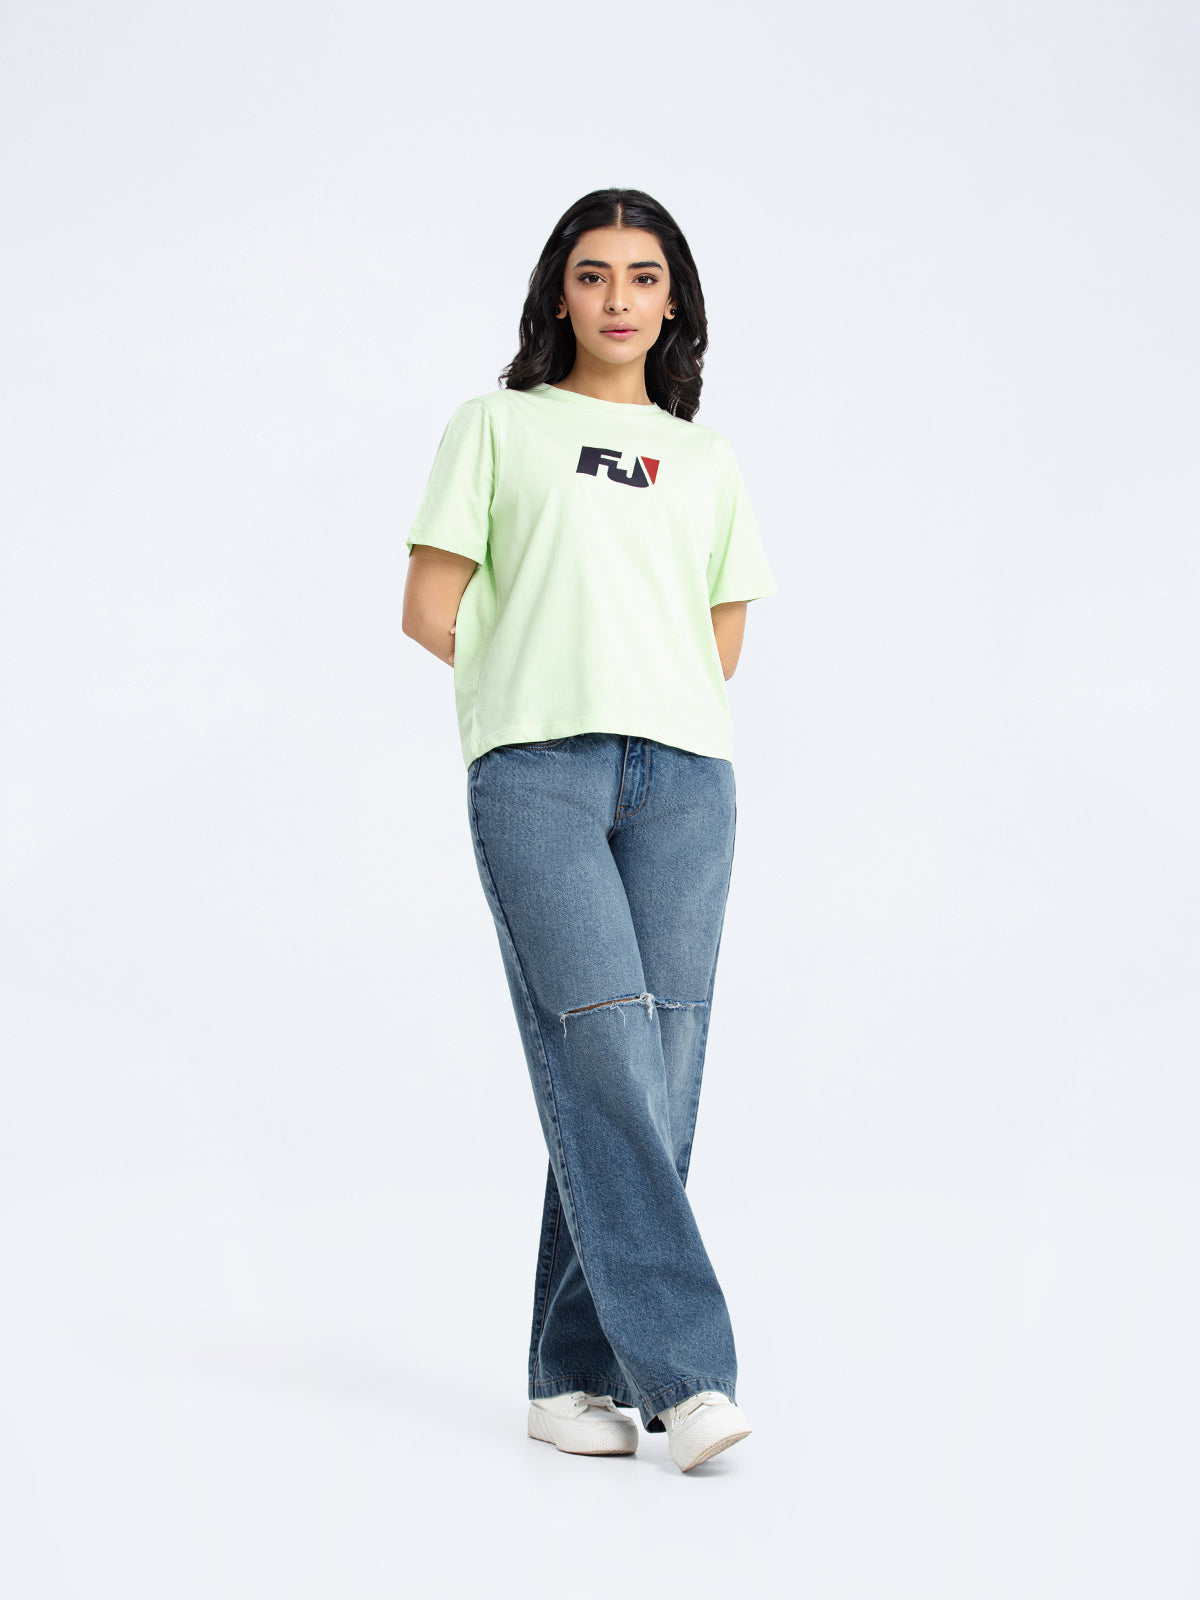 Boxy Fit Graphic Tee - FWTGT24-061